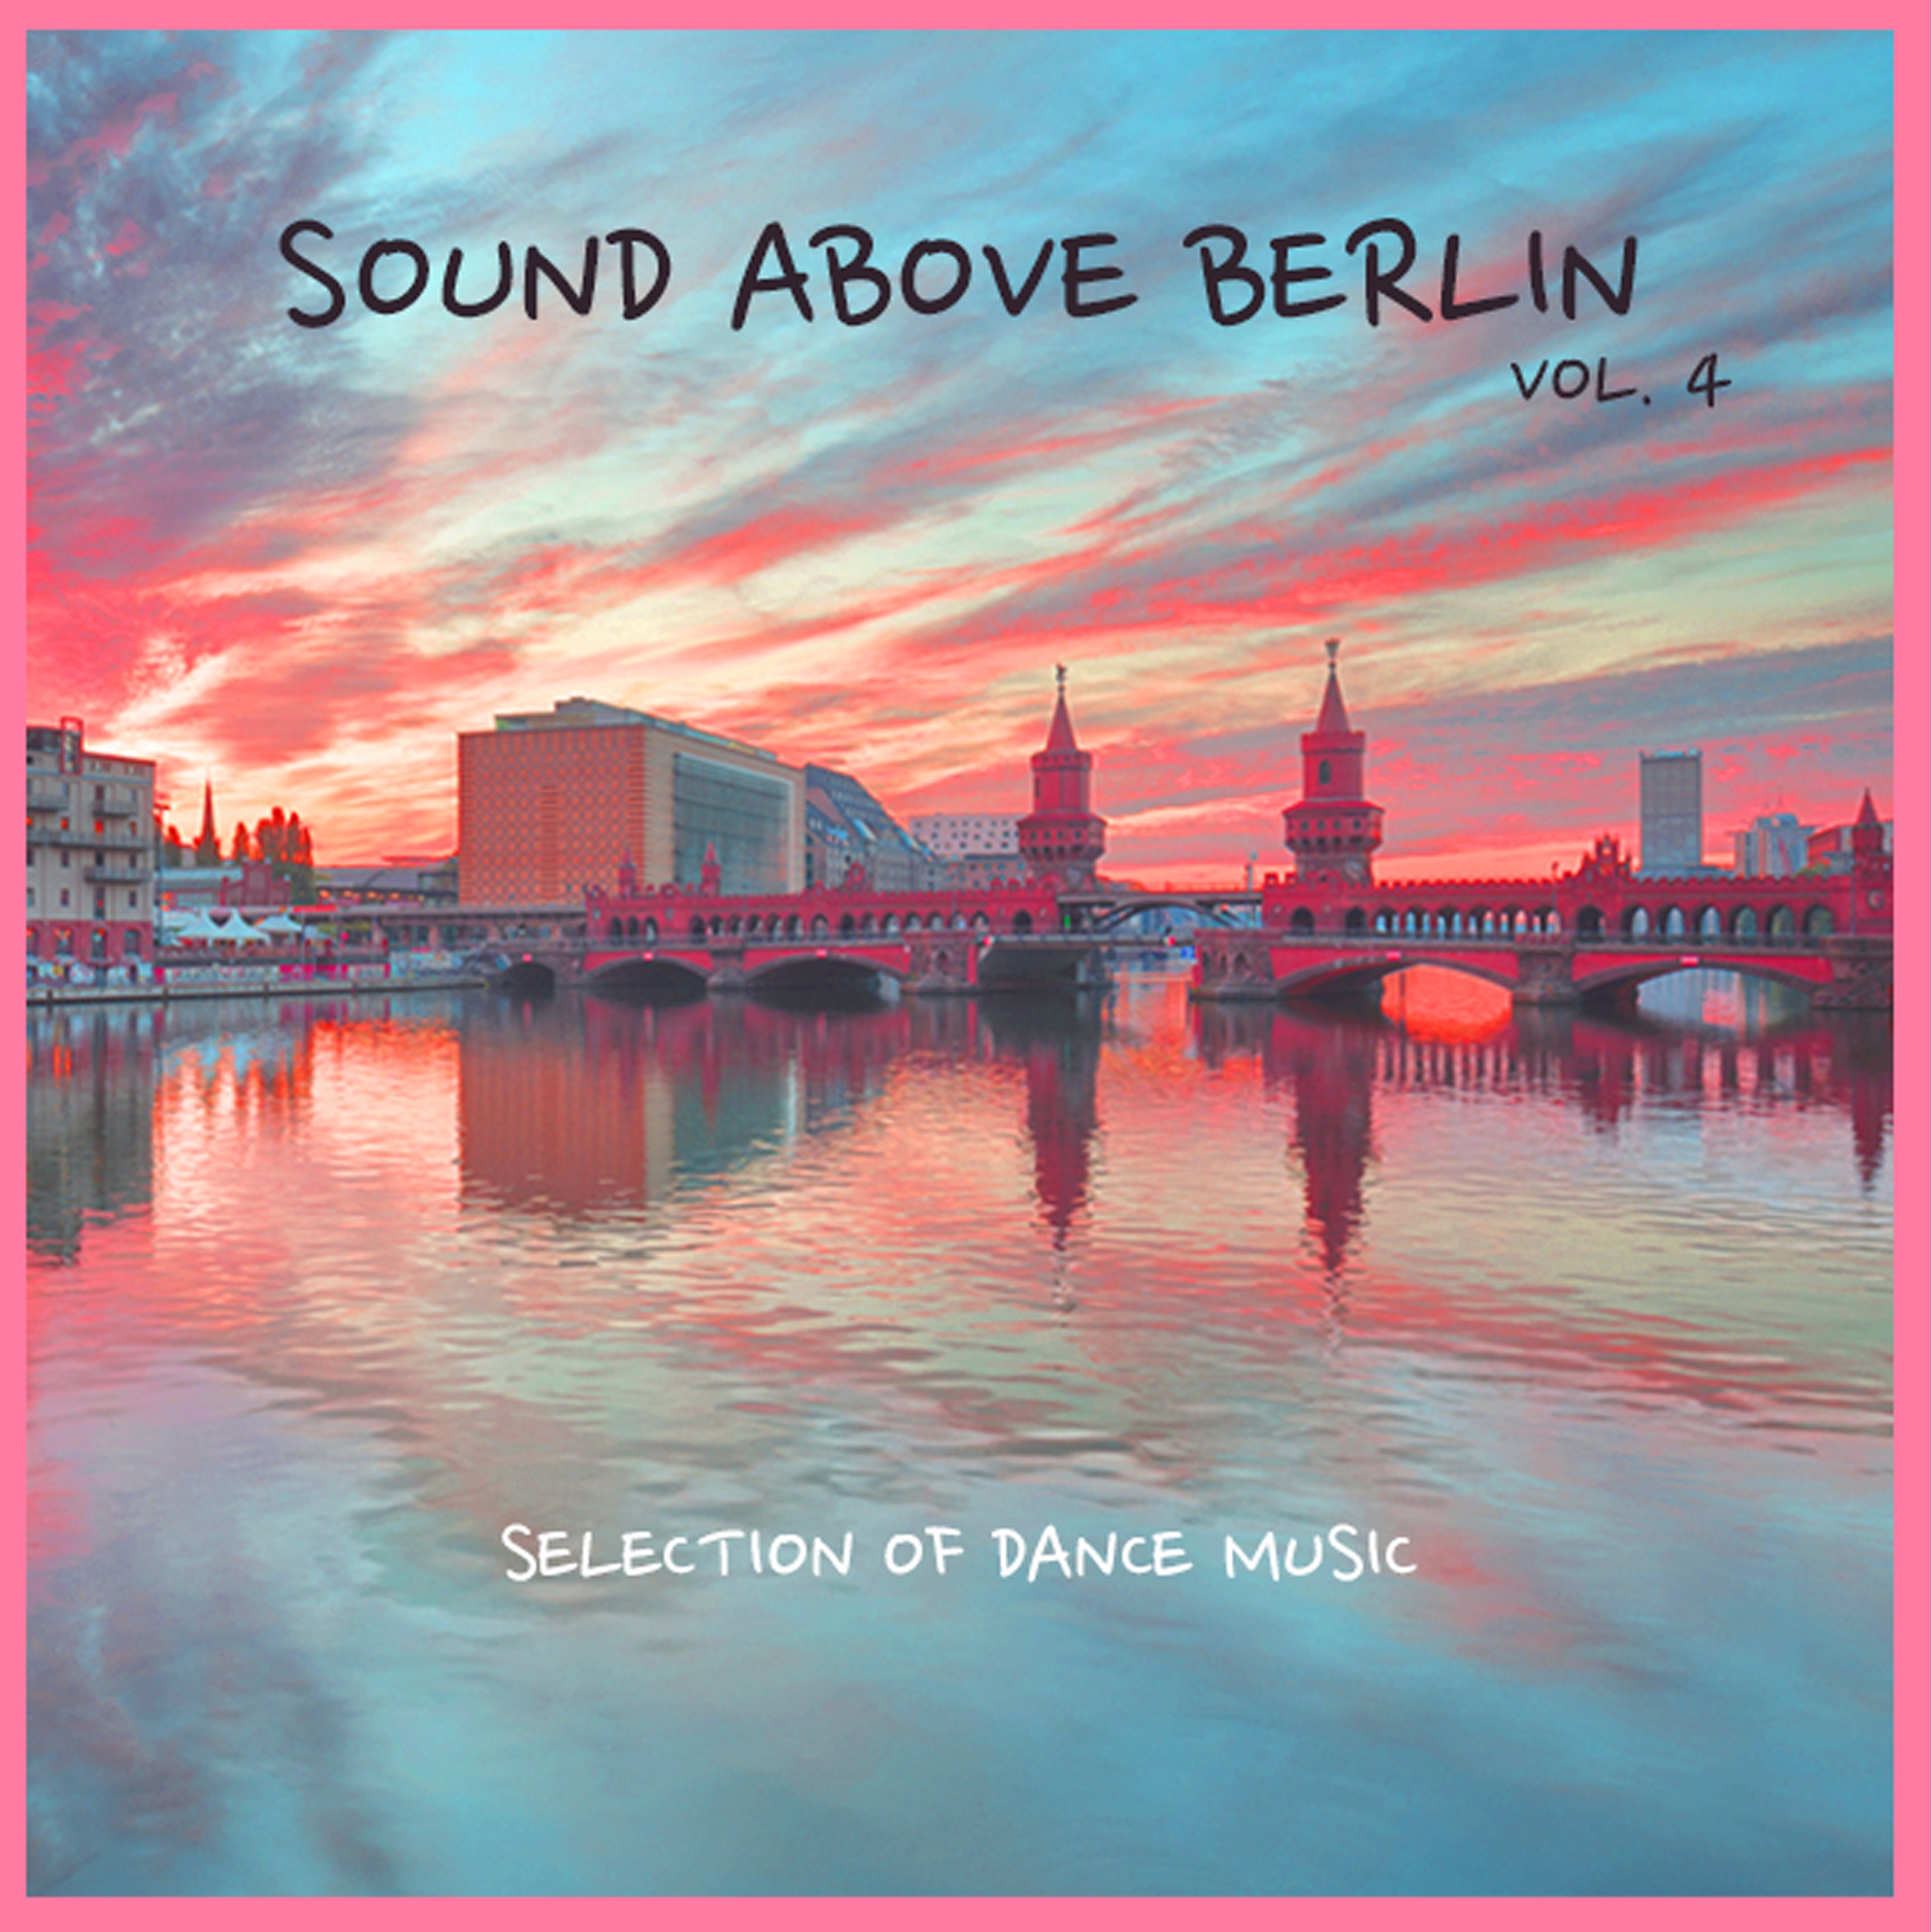 Sound Above Berlin, Vol. 4 - Selection of Dance Music